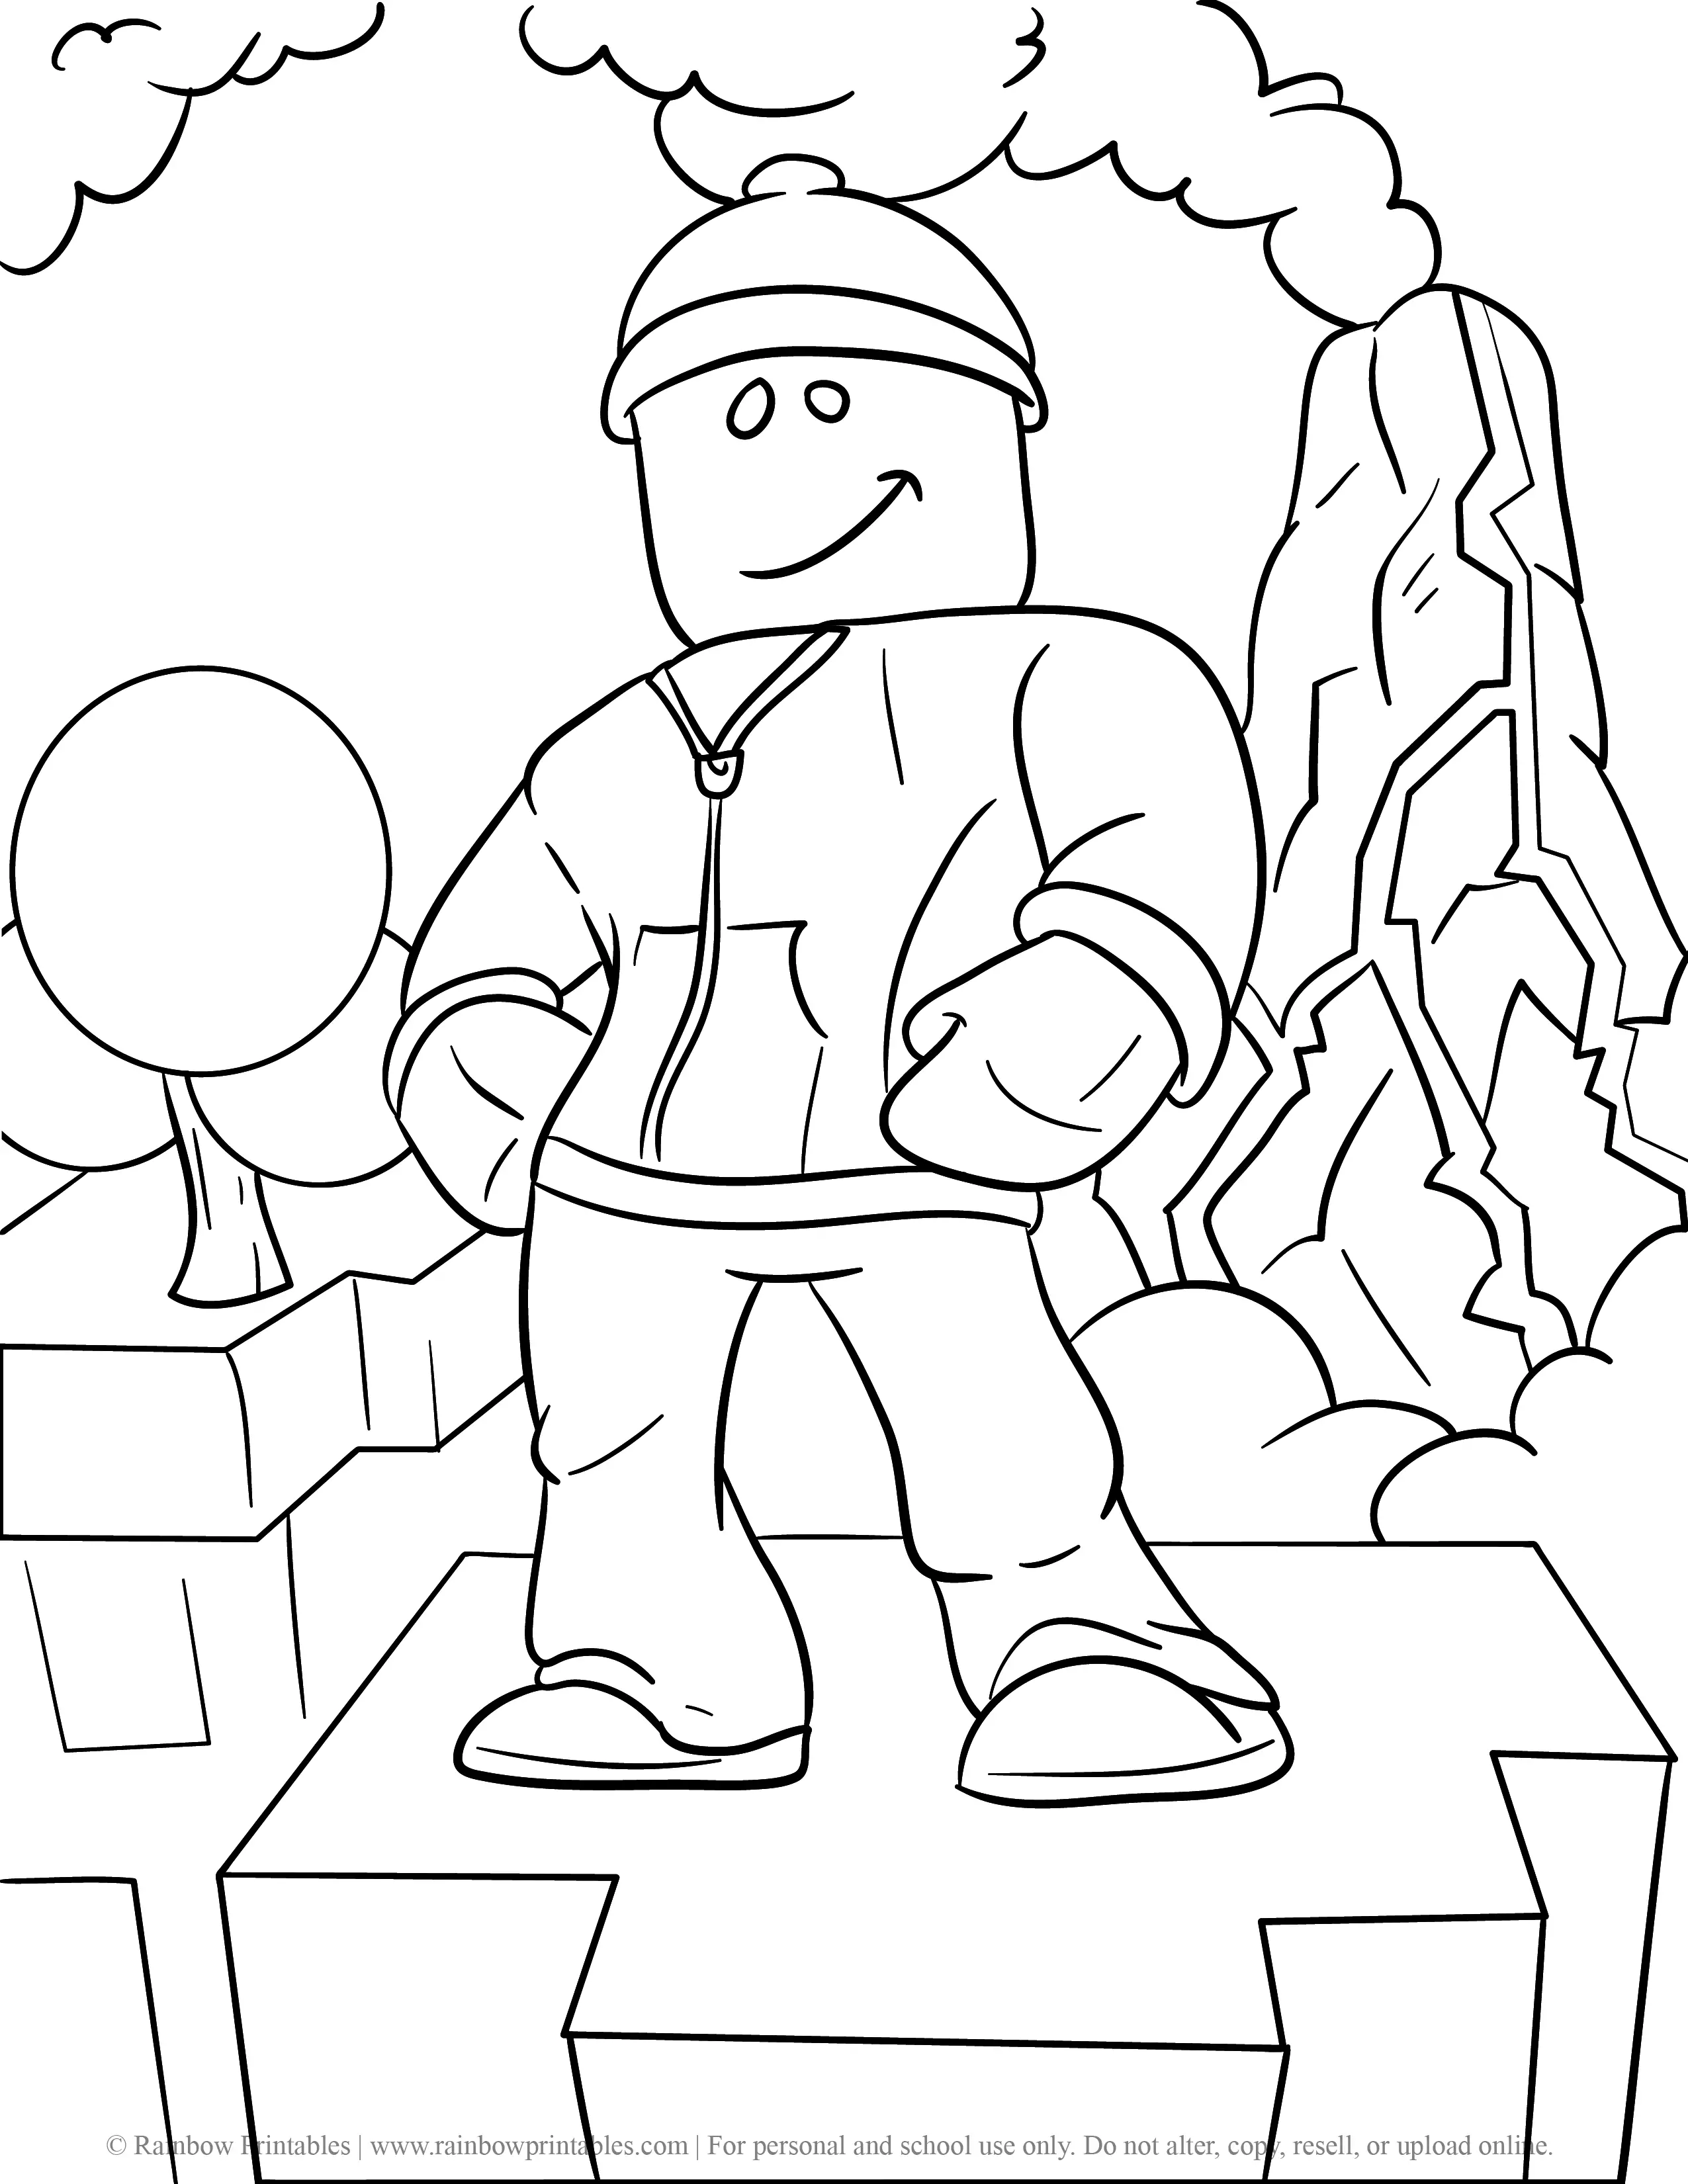 roblox coloring pages for kids video game roblox noob, game, video, robot, template, characters, avatar, drawings, for boys, aesthetic, easy, free, wallpaper, bored